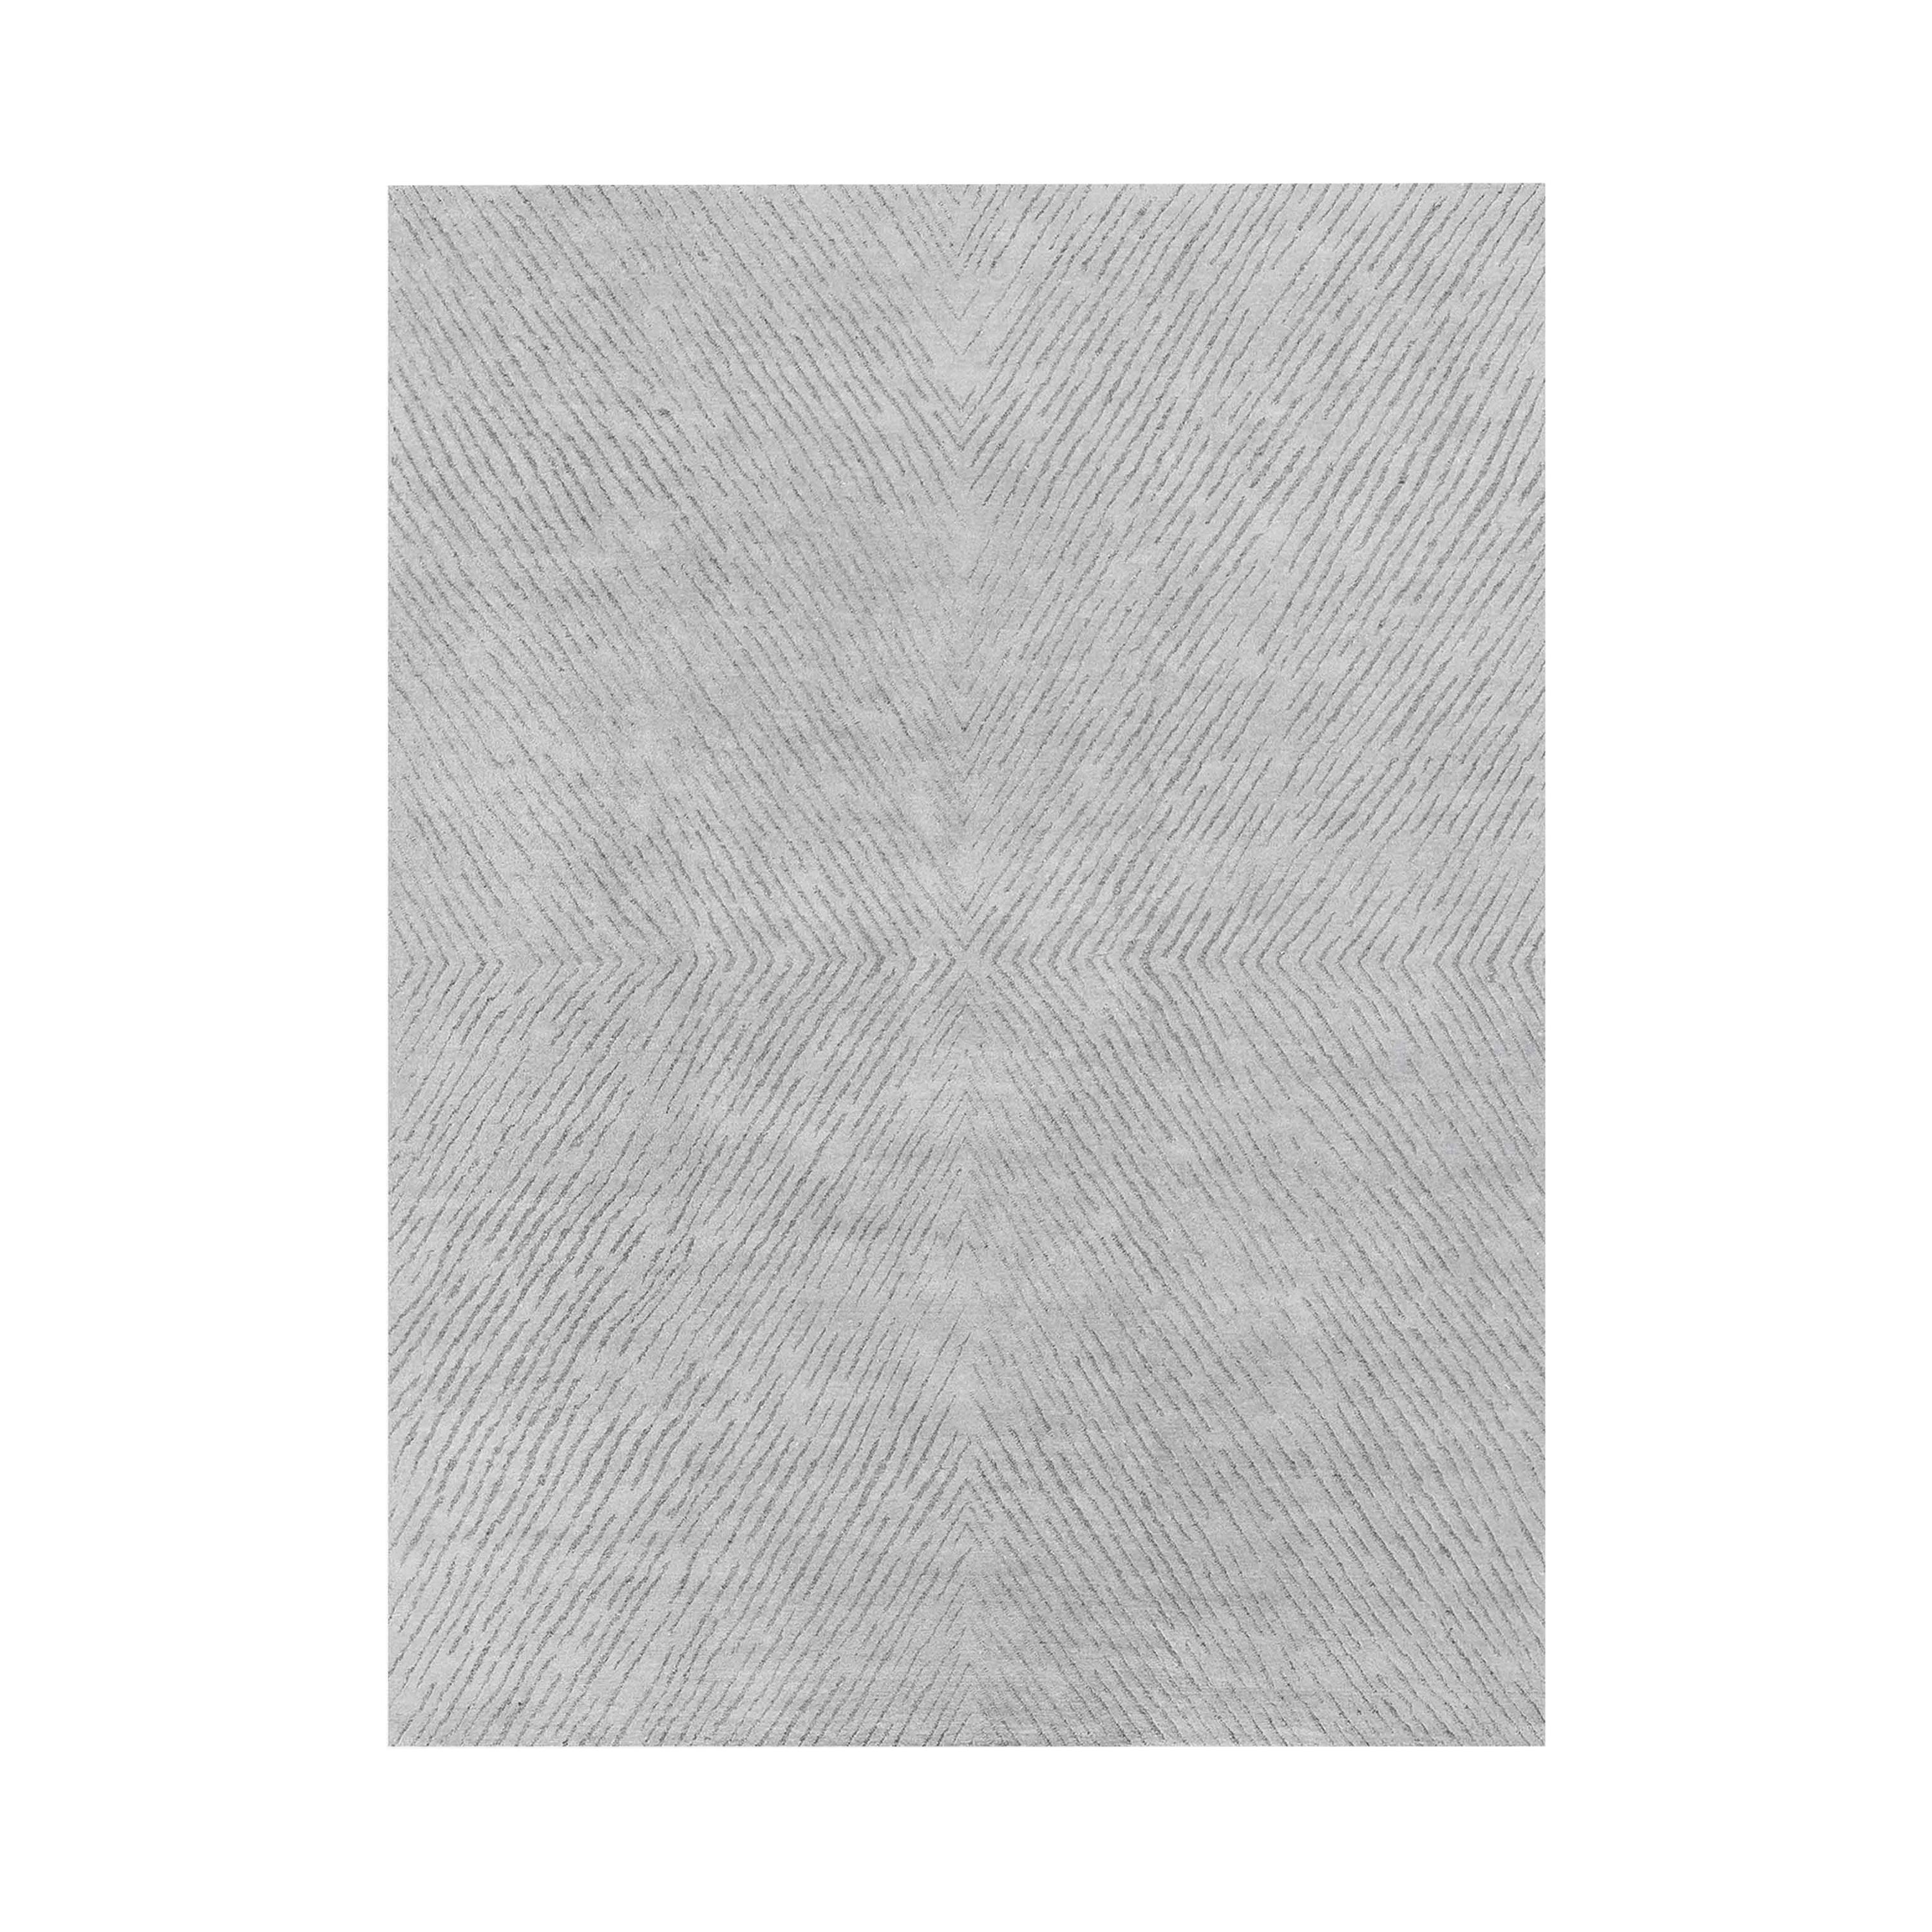 For Sale: Gray (Nickel/Carbon) Ben Soleimani Performance Setta Rug– Handknotted Soft Pile Nickel/Carbon 9'x12'